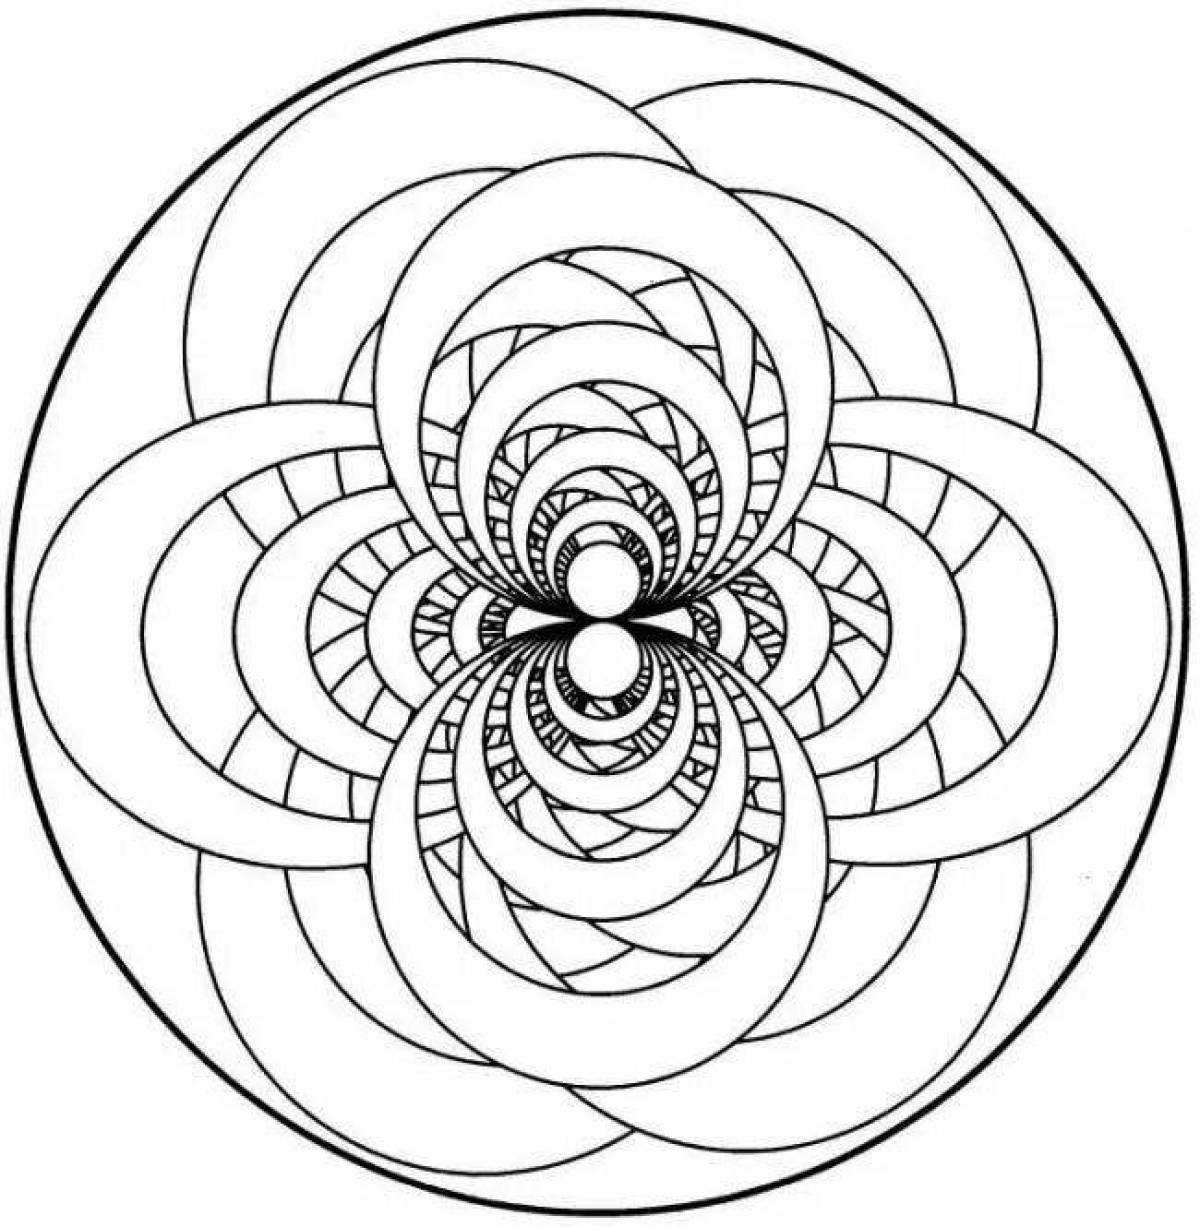 Dramatic spiral coloring page